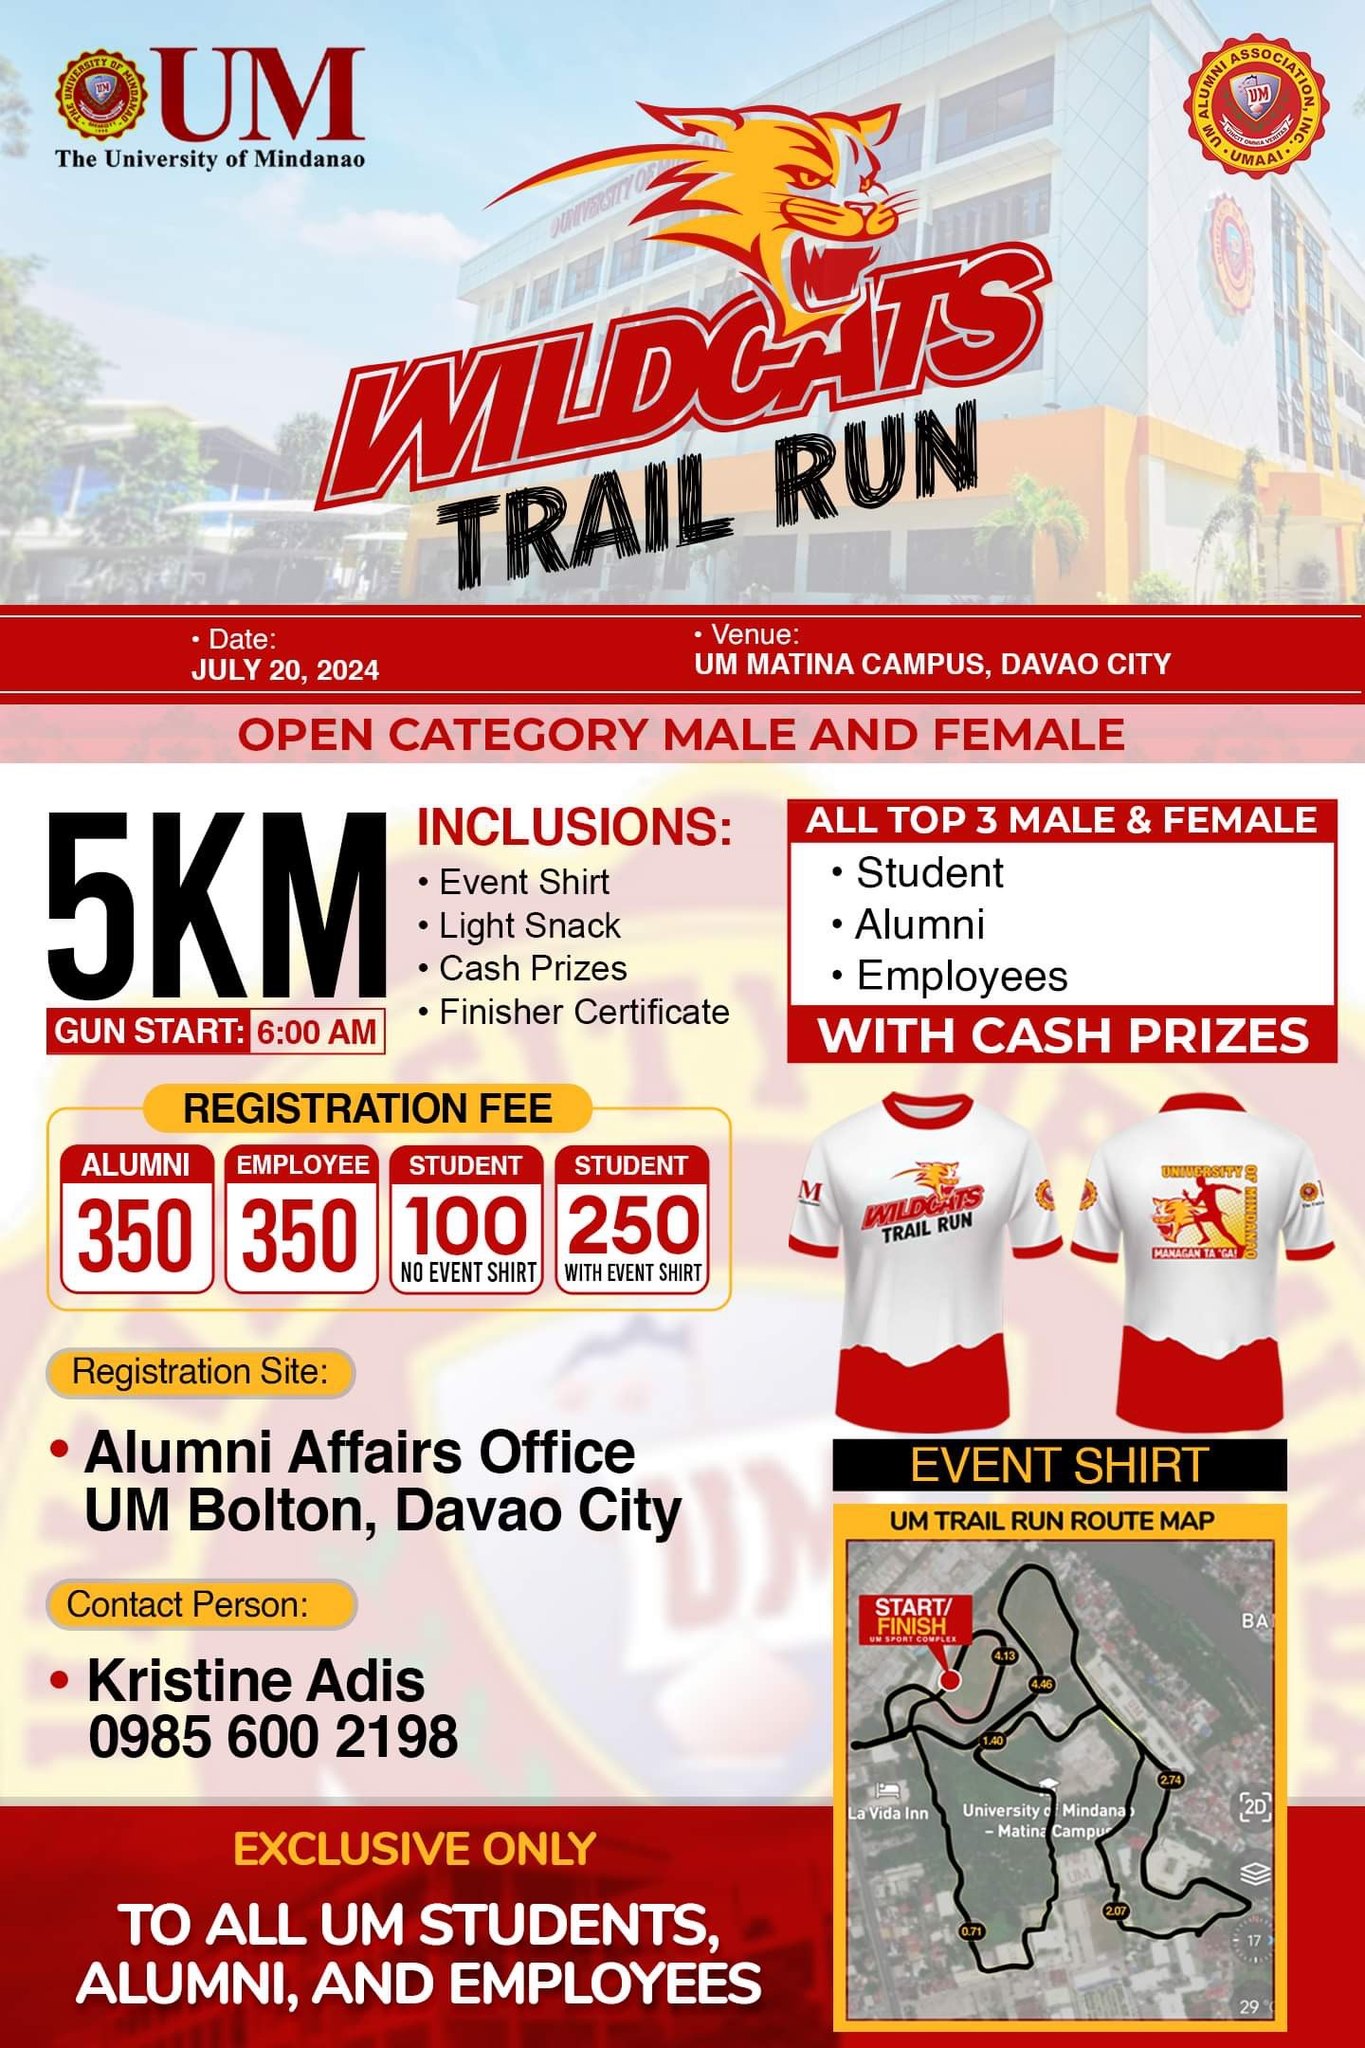 INVITING ALL STUDENTS AND ALUMNI! Join the Wildcats Trail Run 2024!